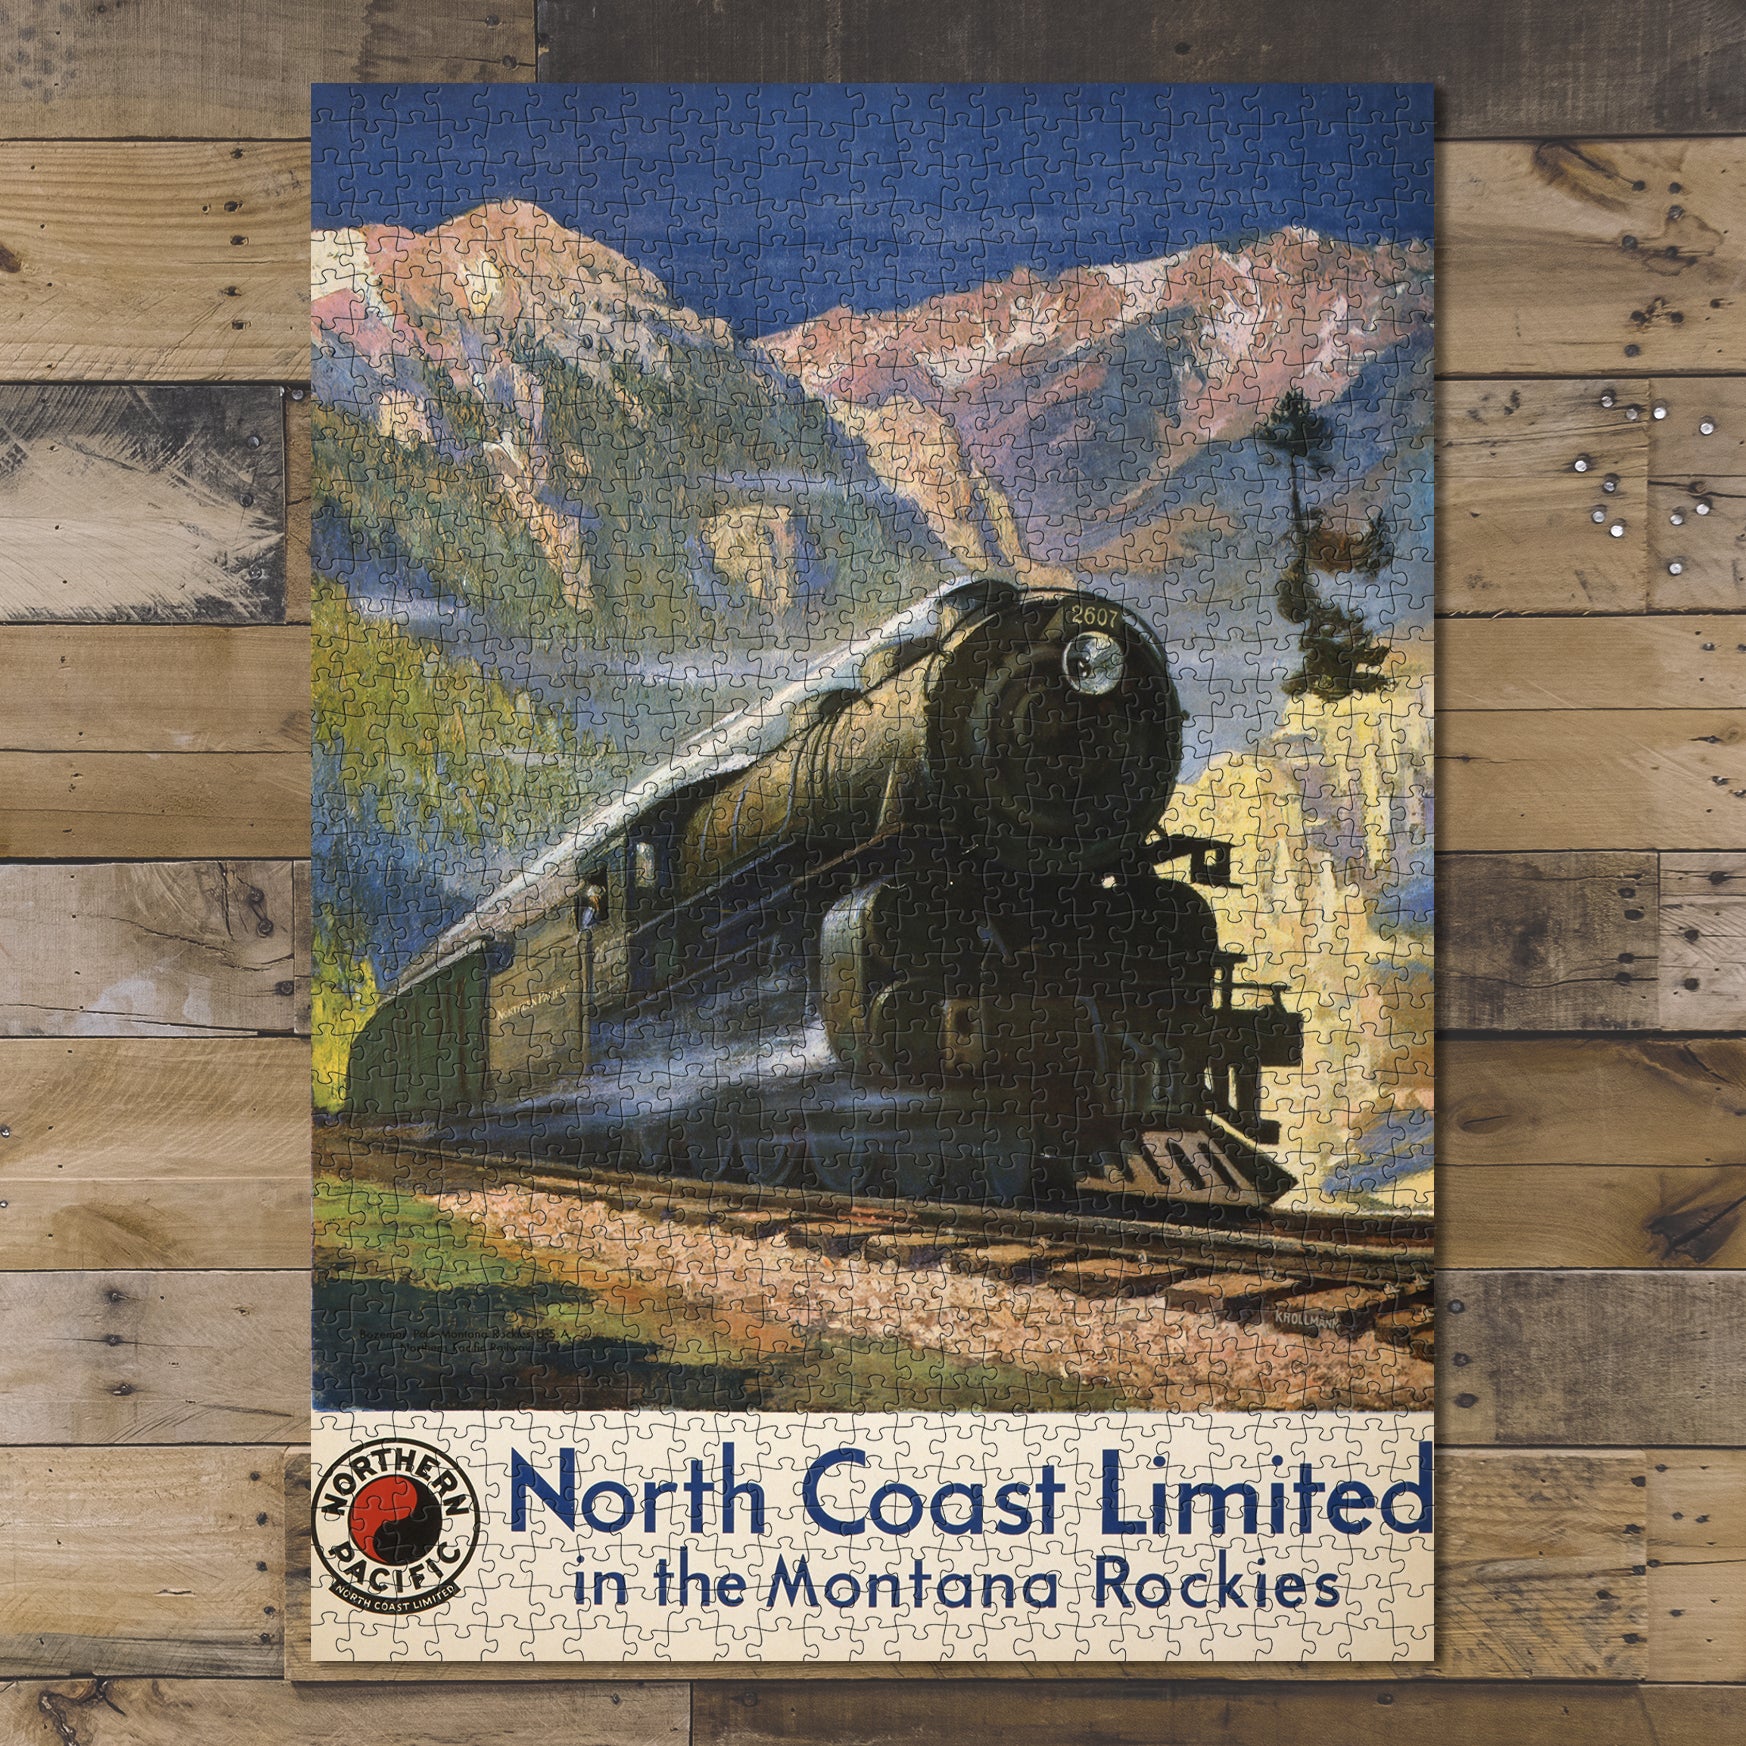 1000 piece puzzle Photo: North Coast Limited Montana Rockies Northern Pacific